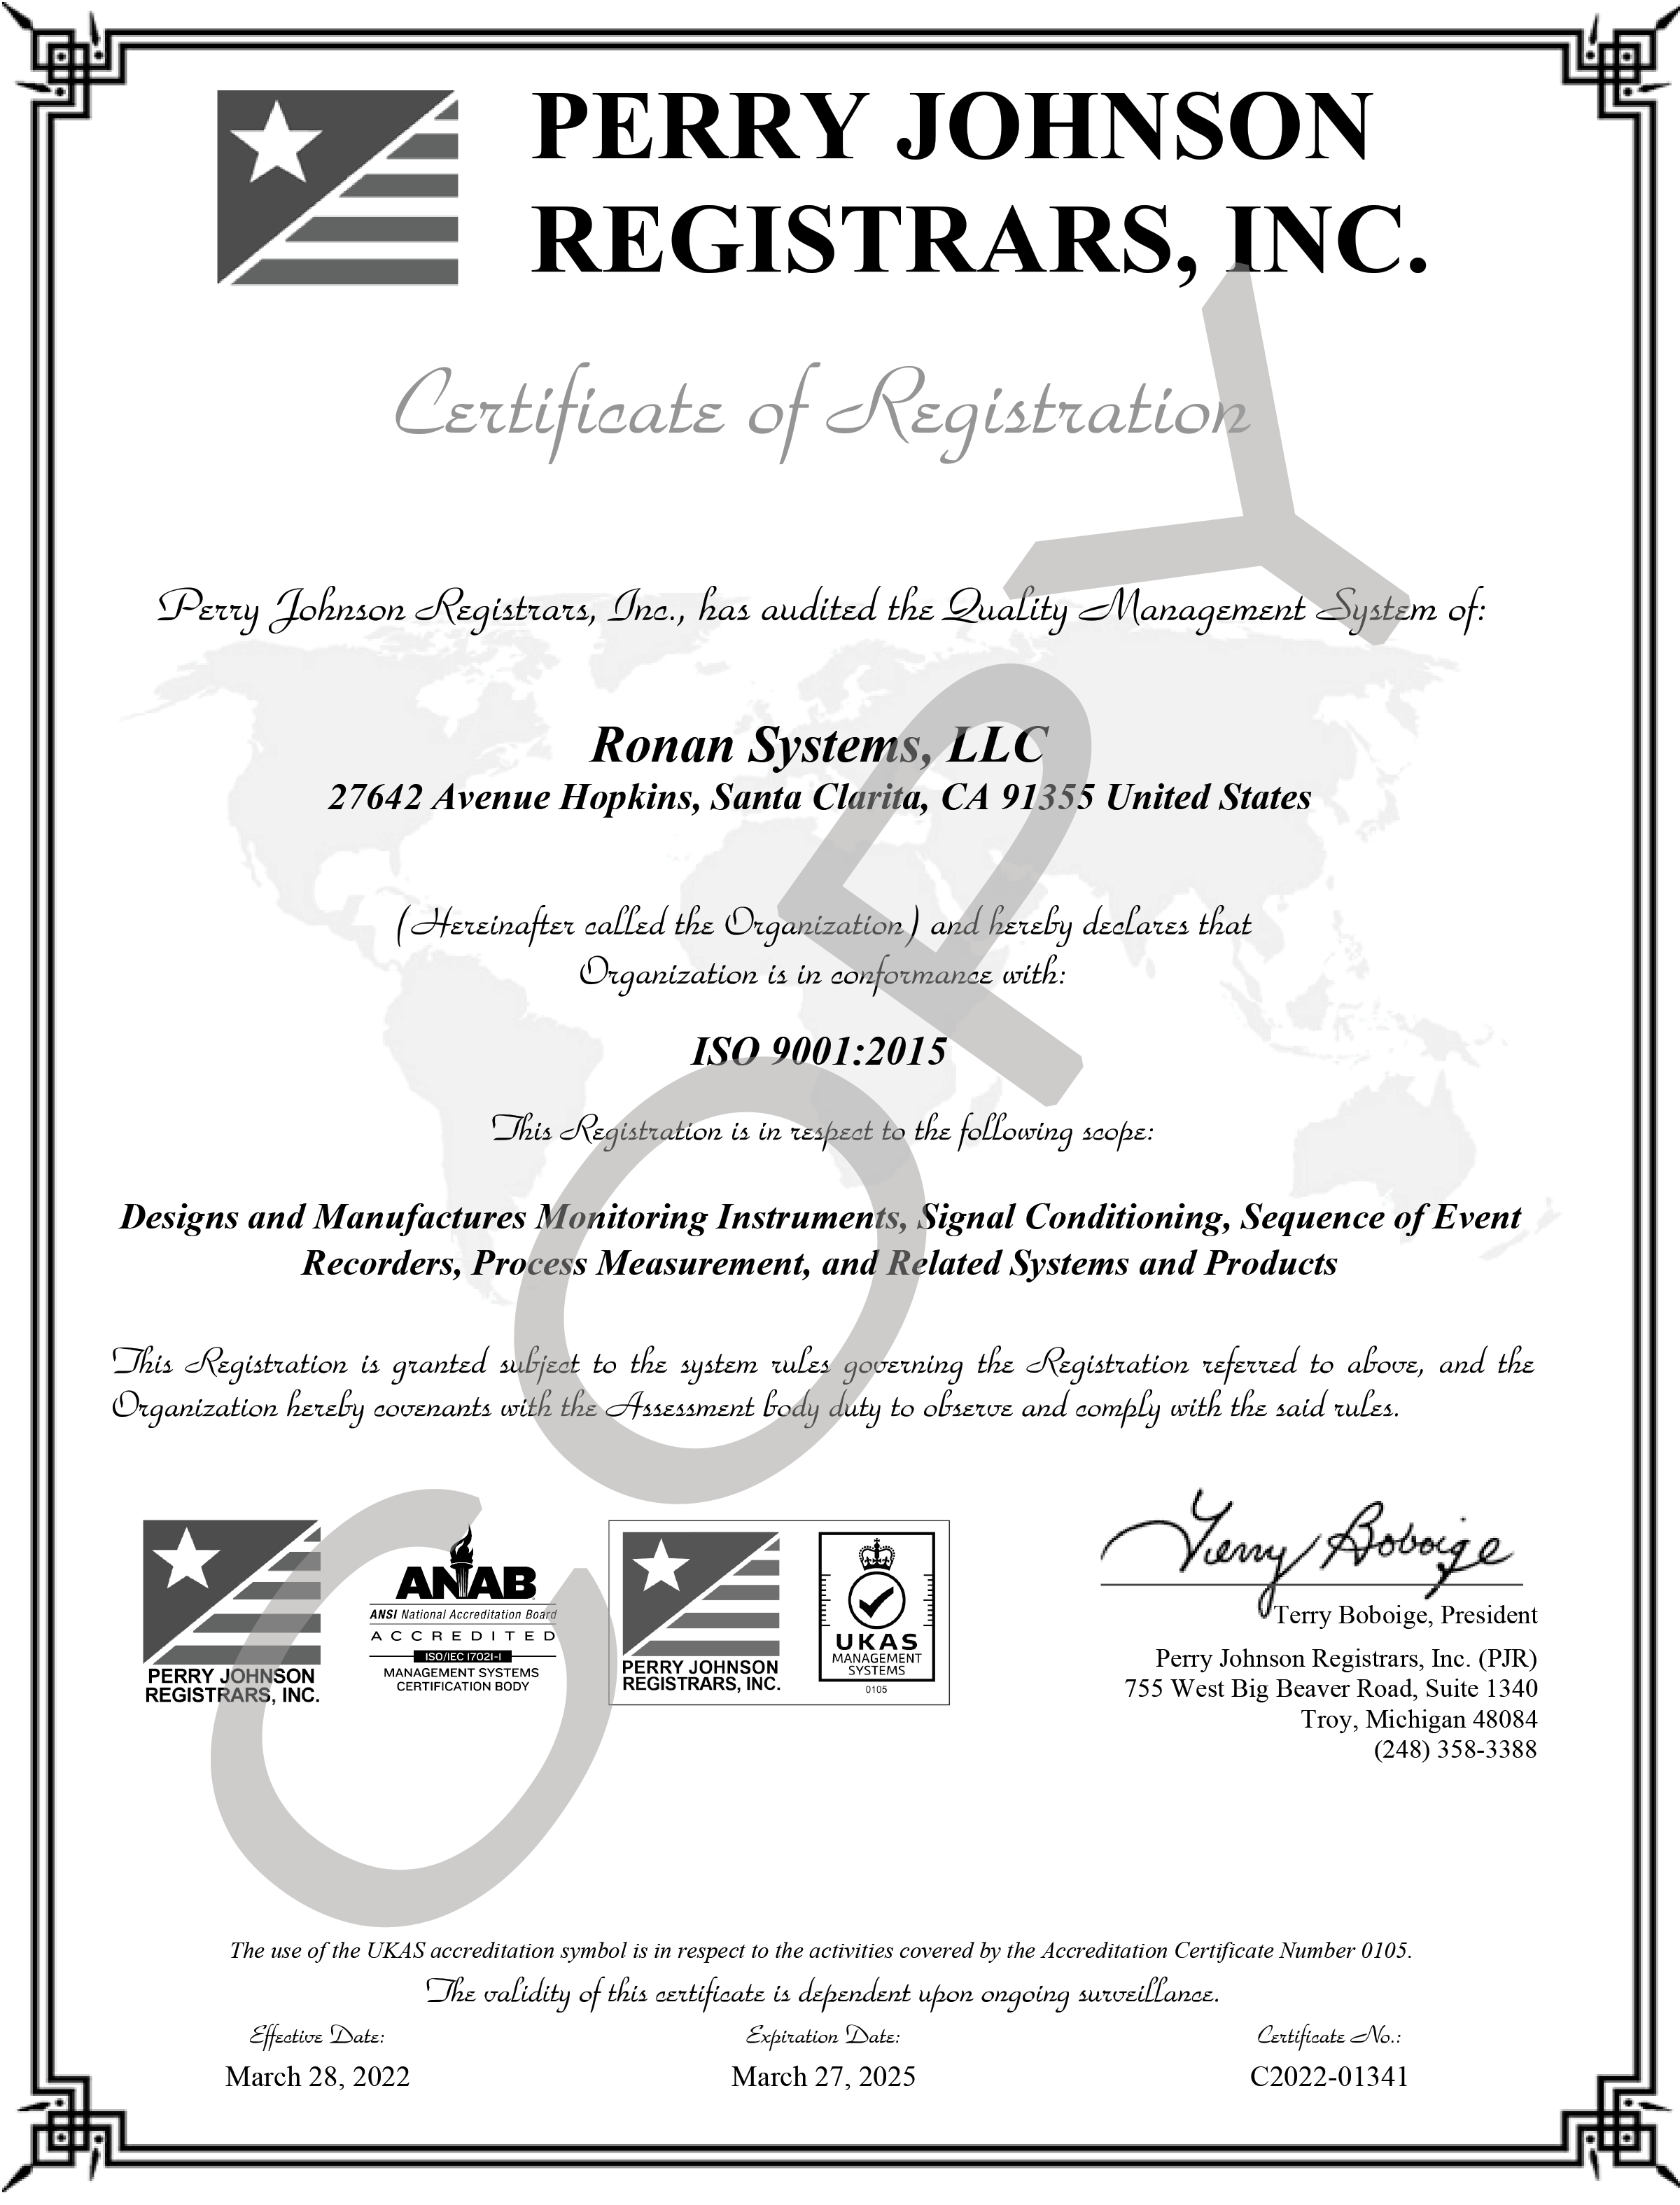 ISO 9001: 2015 CERTIFICATION